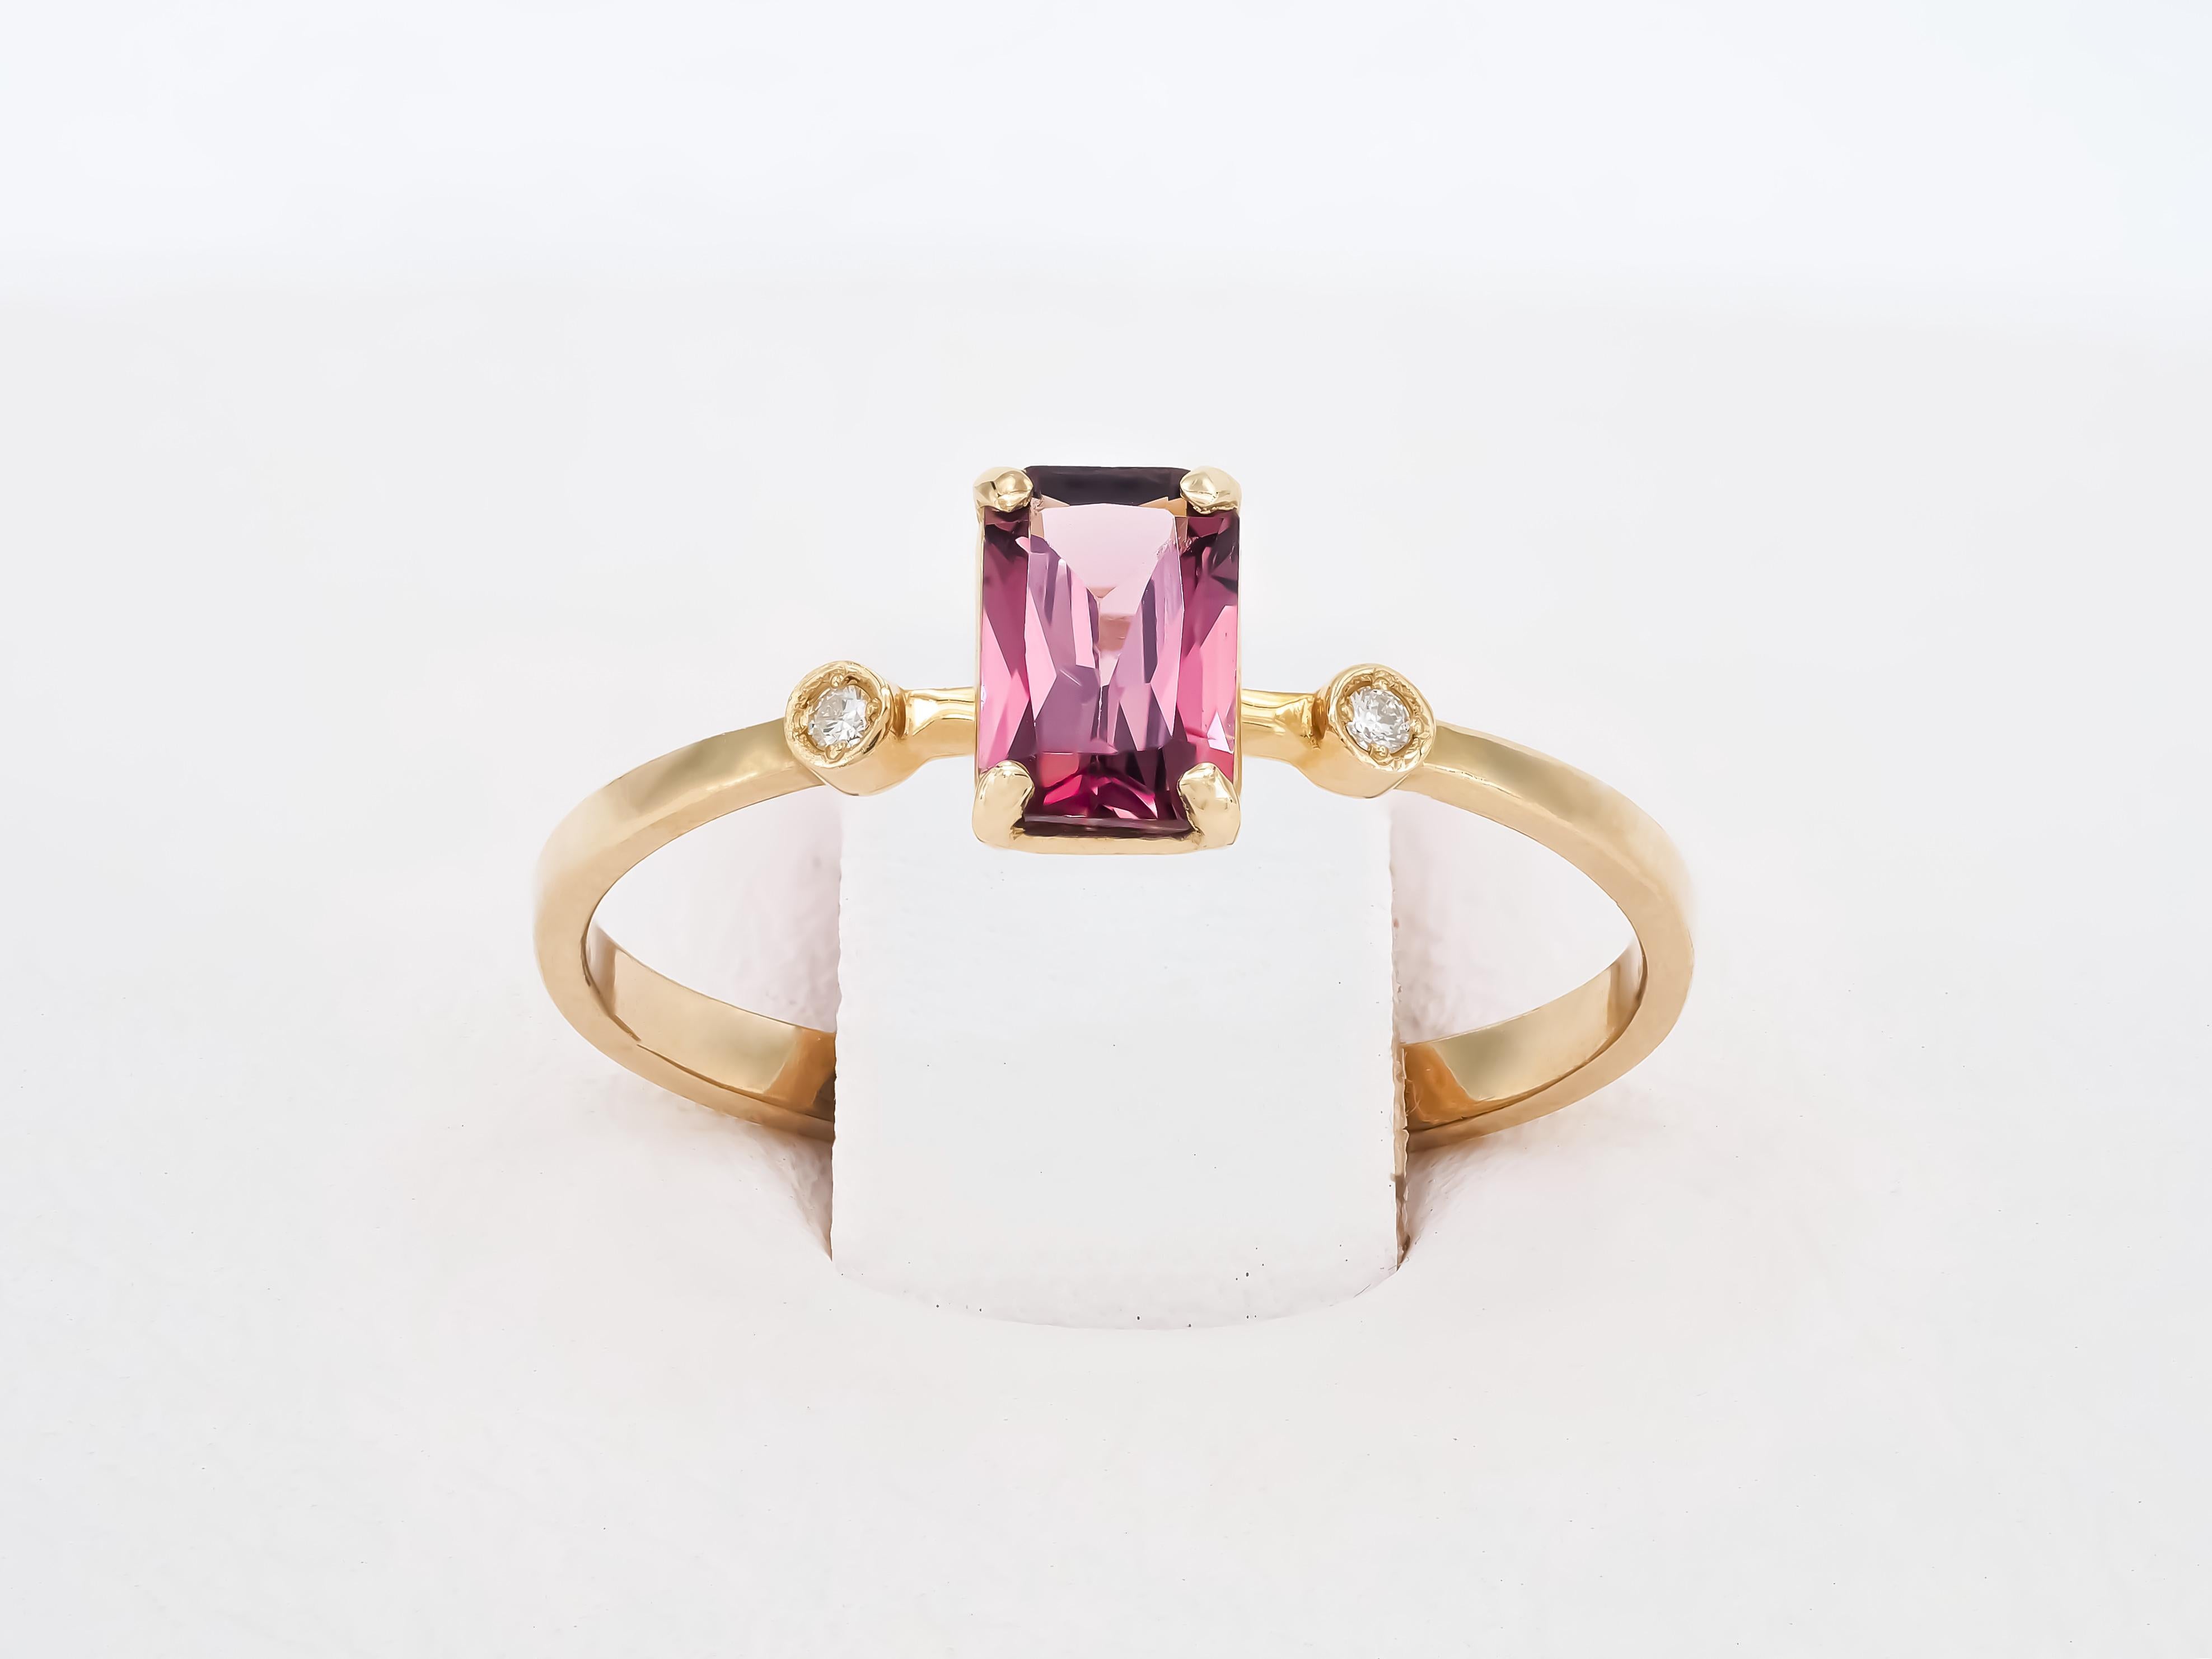 For Sale:  14 karat Gold Ring with Spinel and Diamonds 13